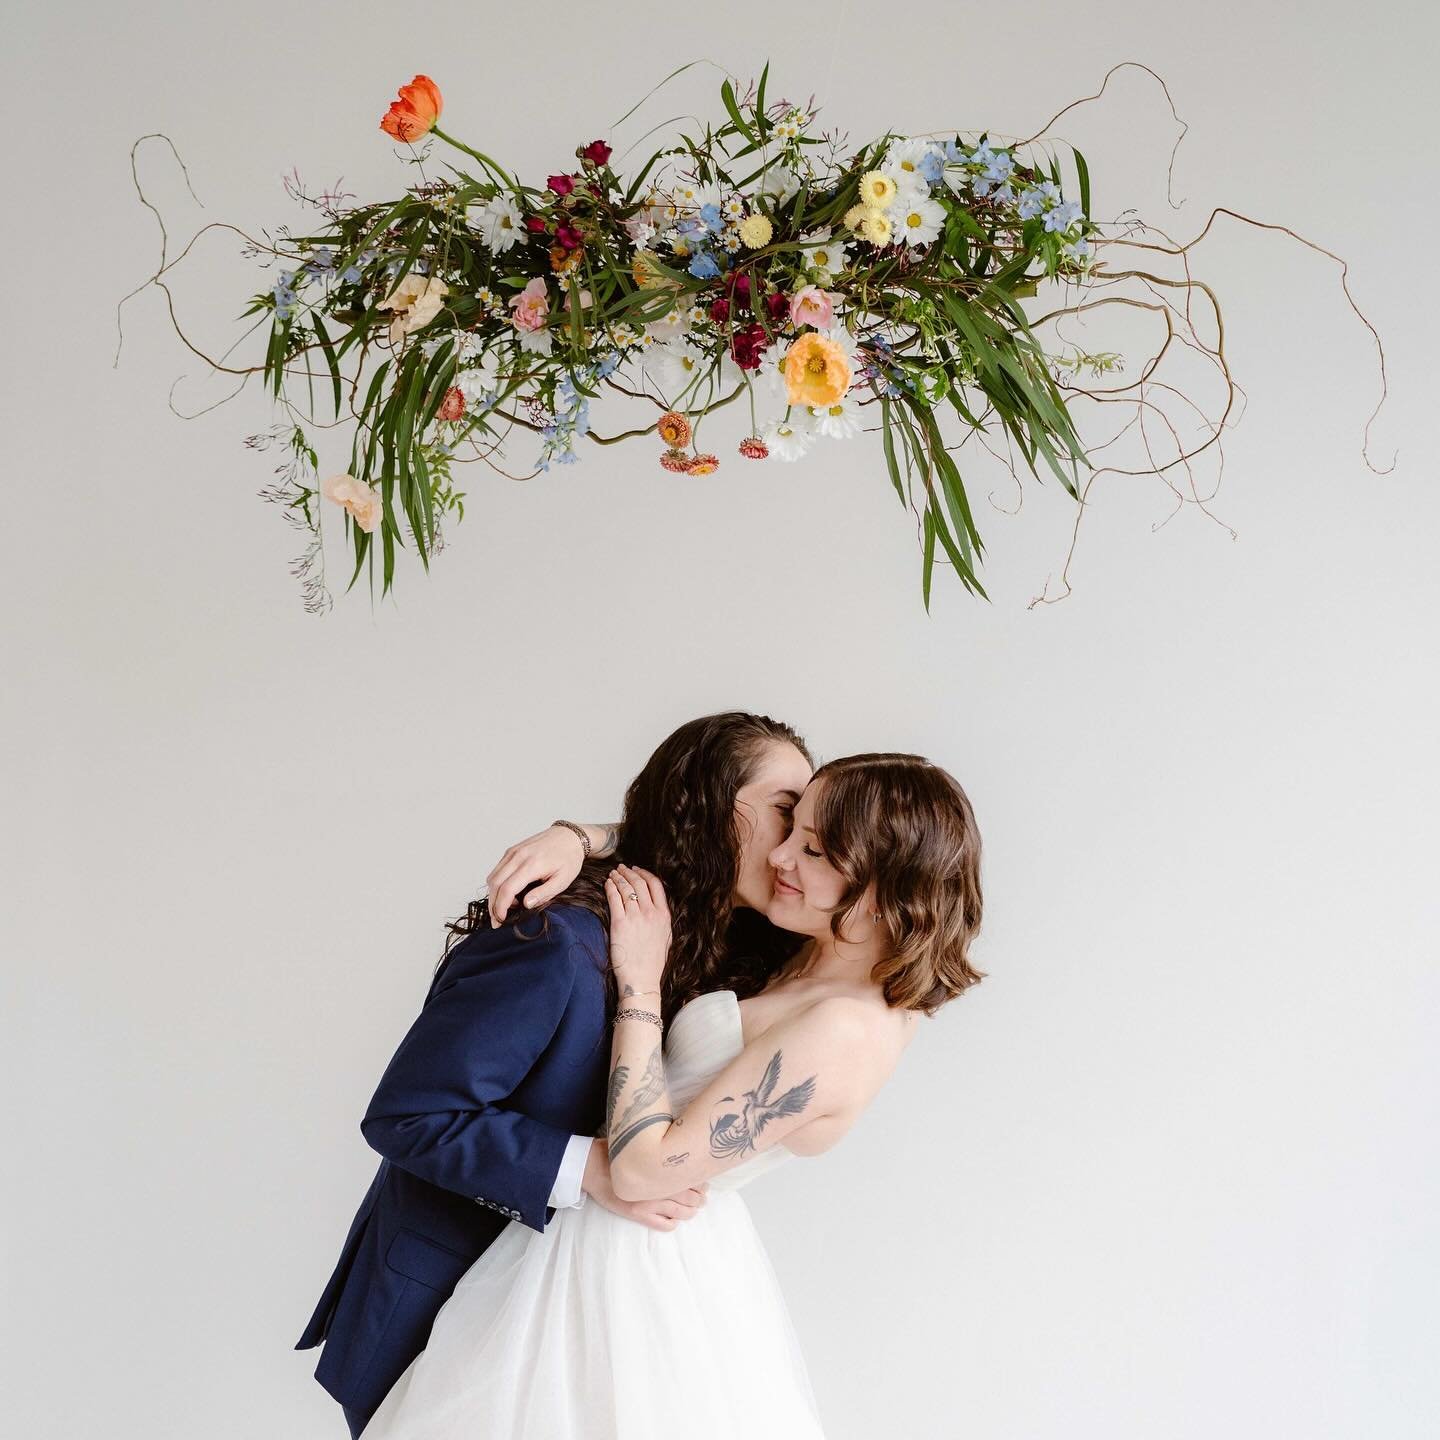 Whimsical spring inspired designs for this styled shoot last week ✨

Floral installation made using just chicken wire and twigs. Featuring local blooms from @coloradoflowercollective of course! Sustainable and unique floral designs are in!! Let&rsquo